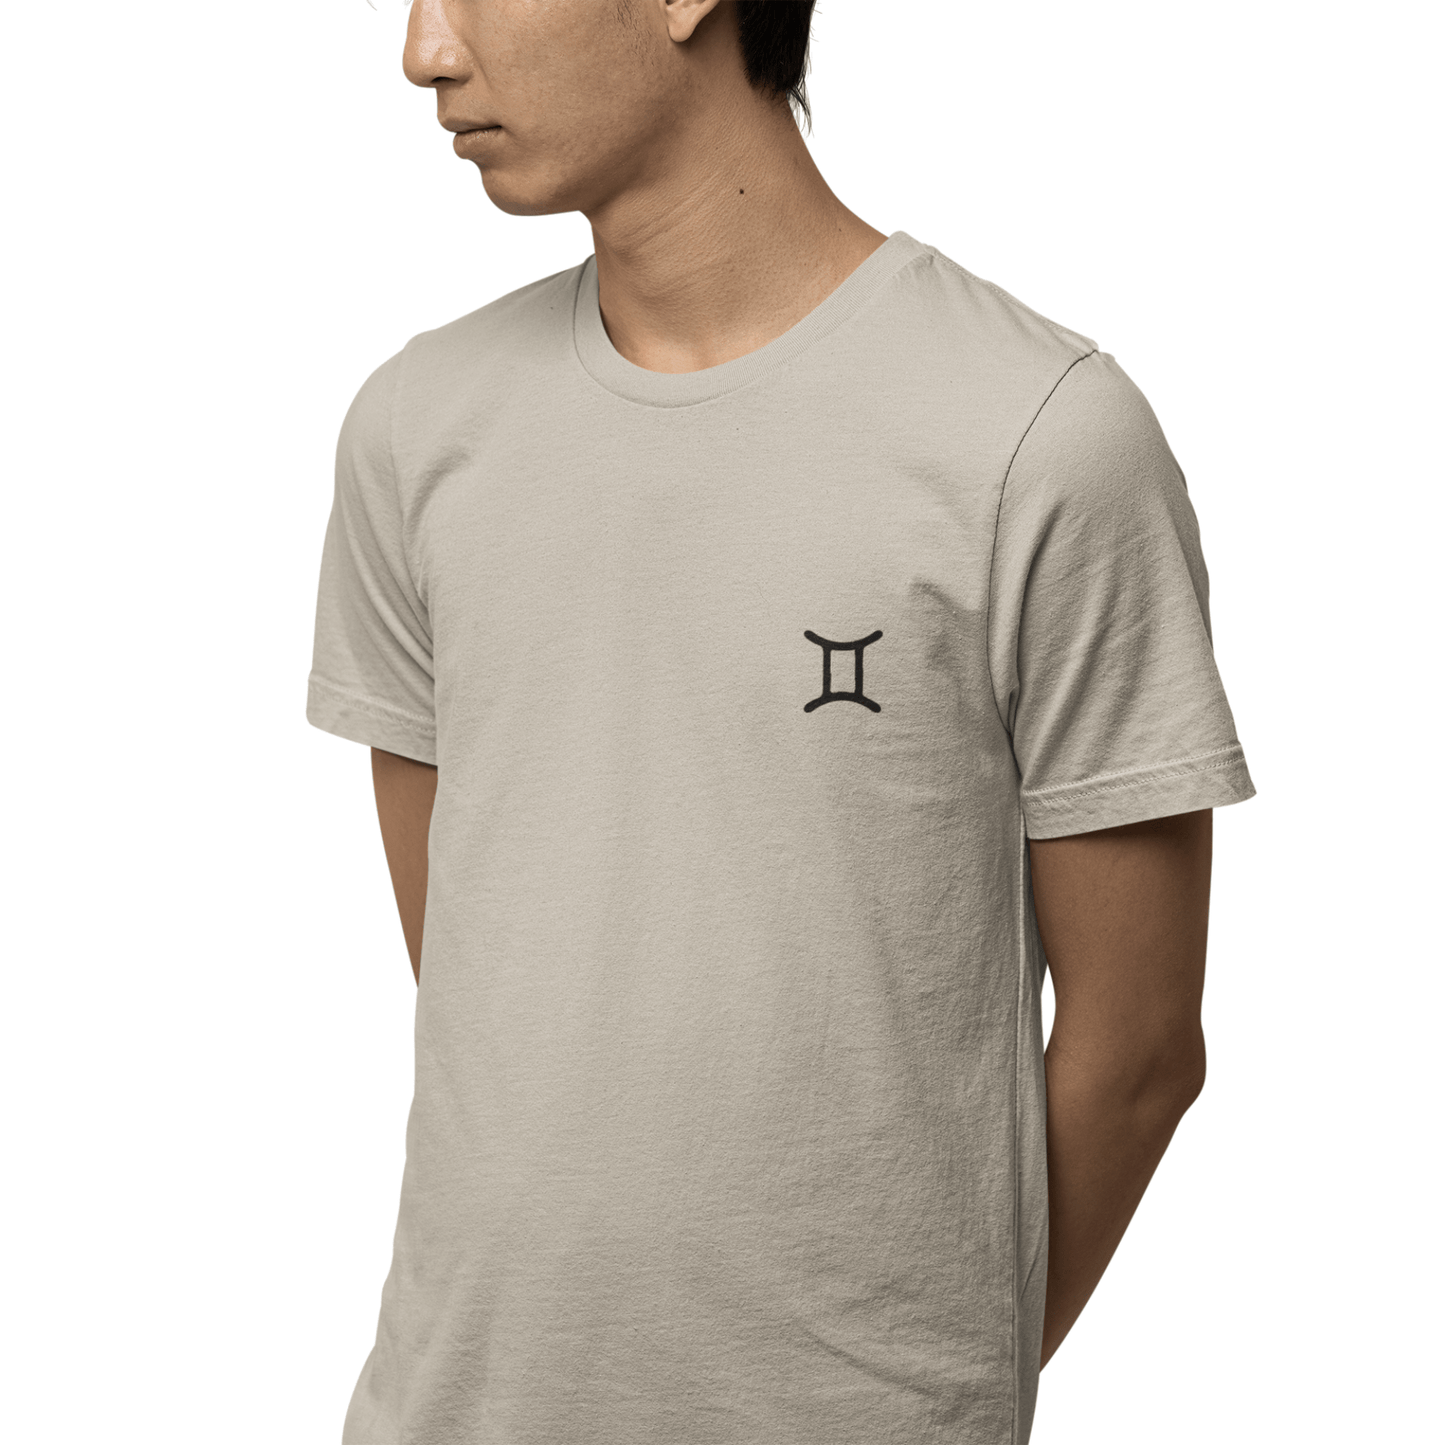 T-Shirt Gemini Twin Glyph T-Shirt: Dynamic Style for the Social Butterfly